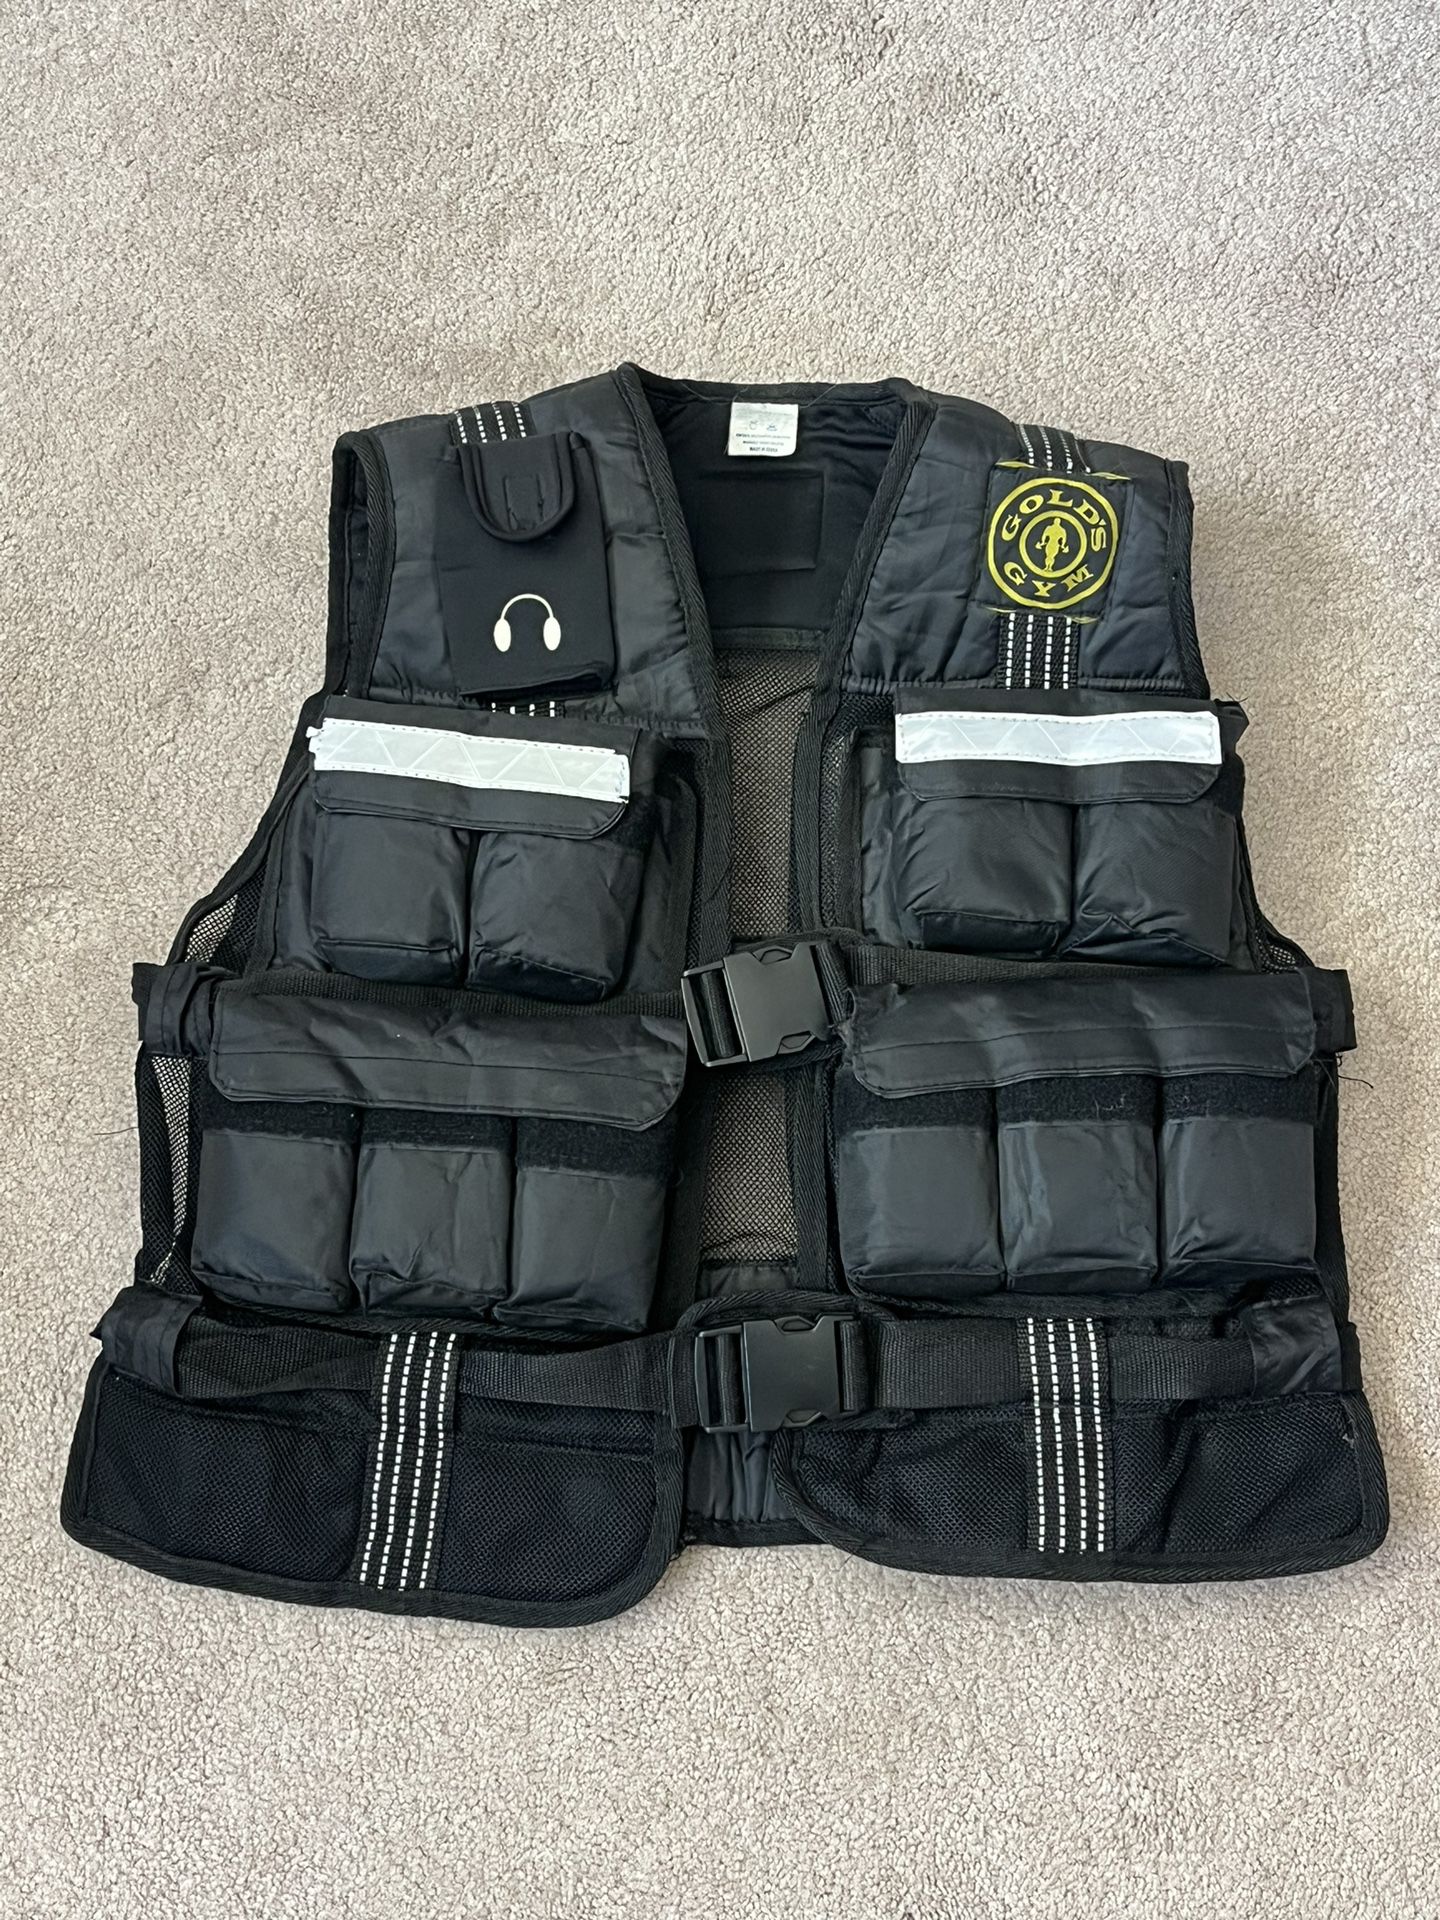 GOLDS GYM, Exercise 20 Lbs weighted vest, Adjustable Up To 20 Pounds 